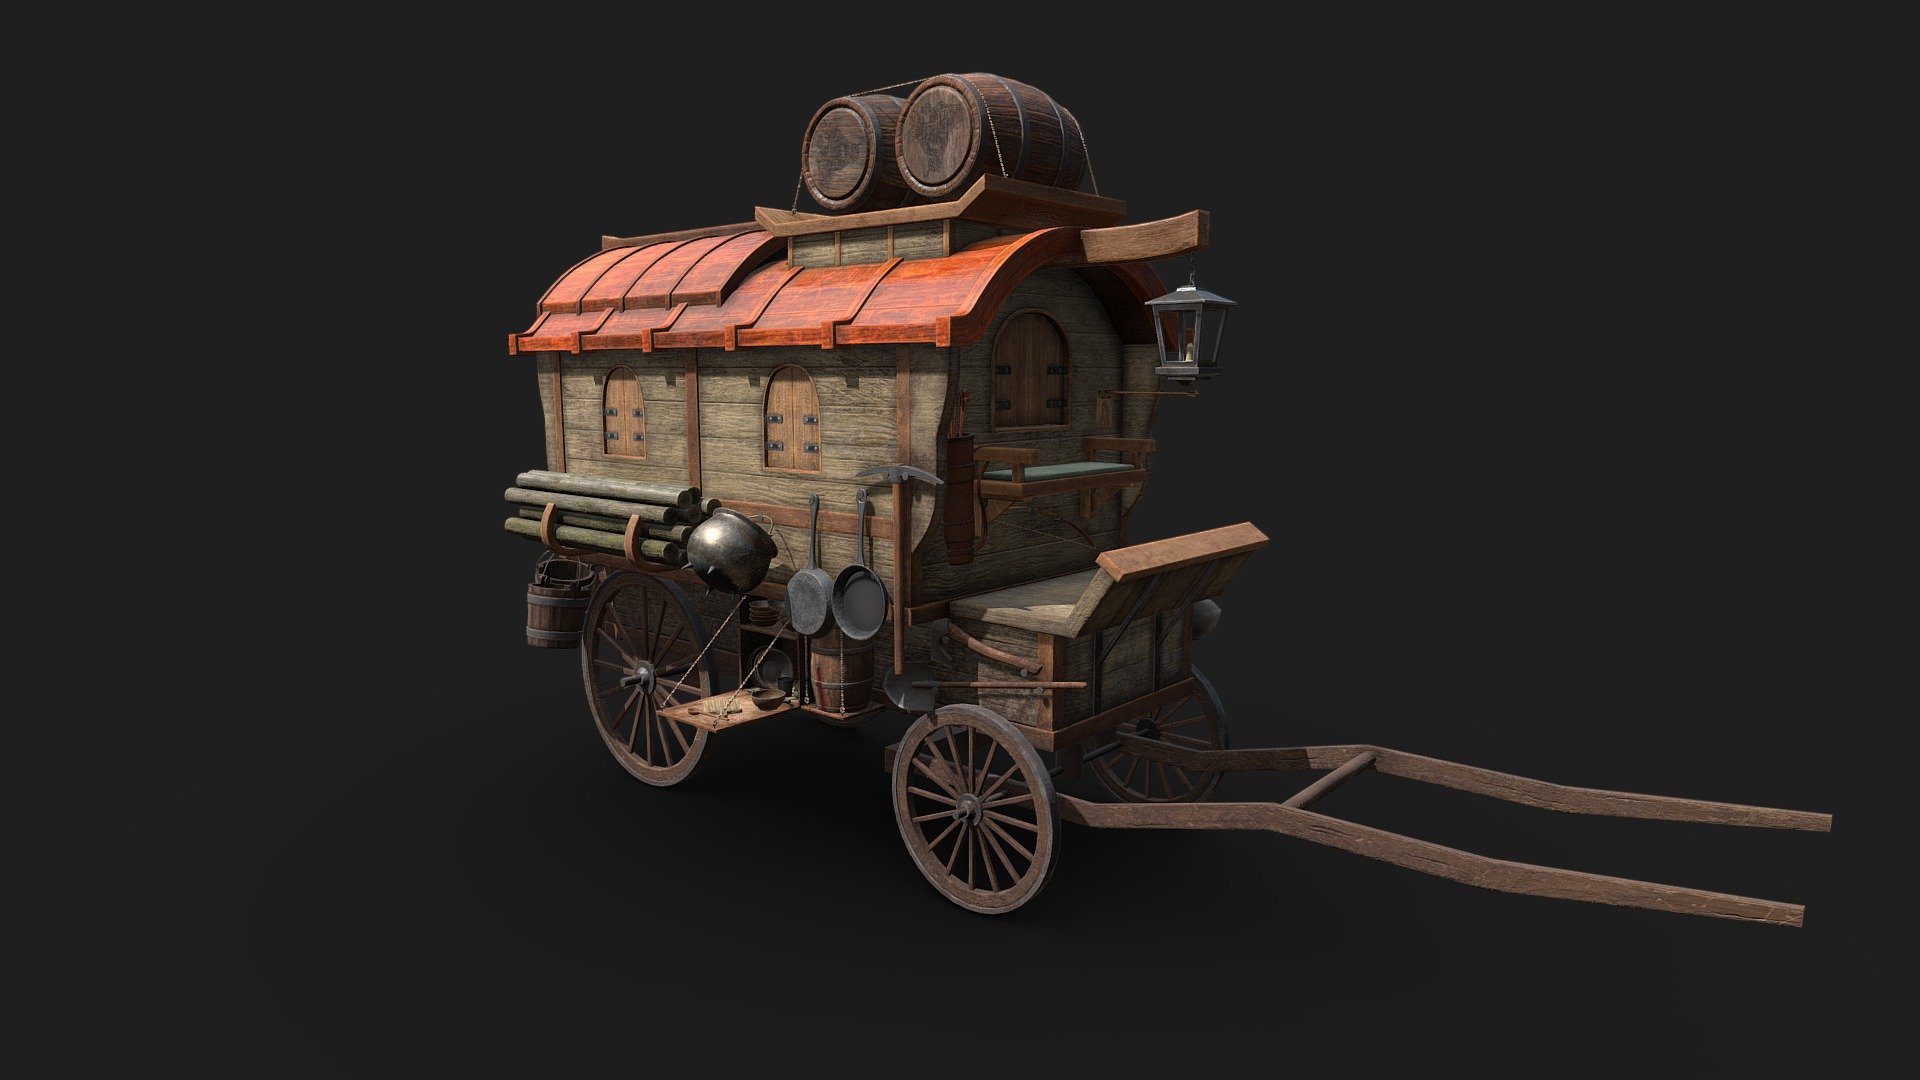 This cart was made as my graduation project on the course - Legendary Game Dev.
It took 2 months to work with this model with breaks.
It has 2 texture sets 4k.
Link to the project in ArtStation:
https://www.artstation.com/artwork/1xlLd8 - Old cart - 3D model by Sergey_Pavlov 3d model